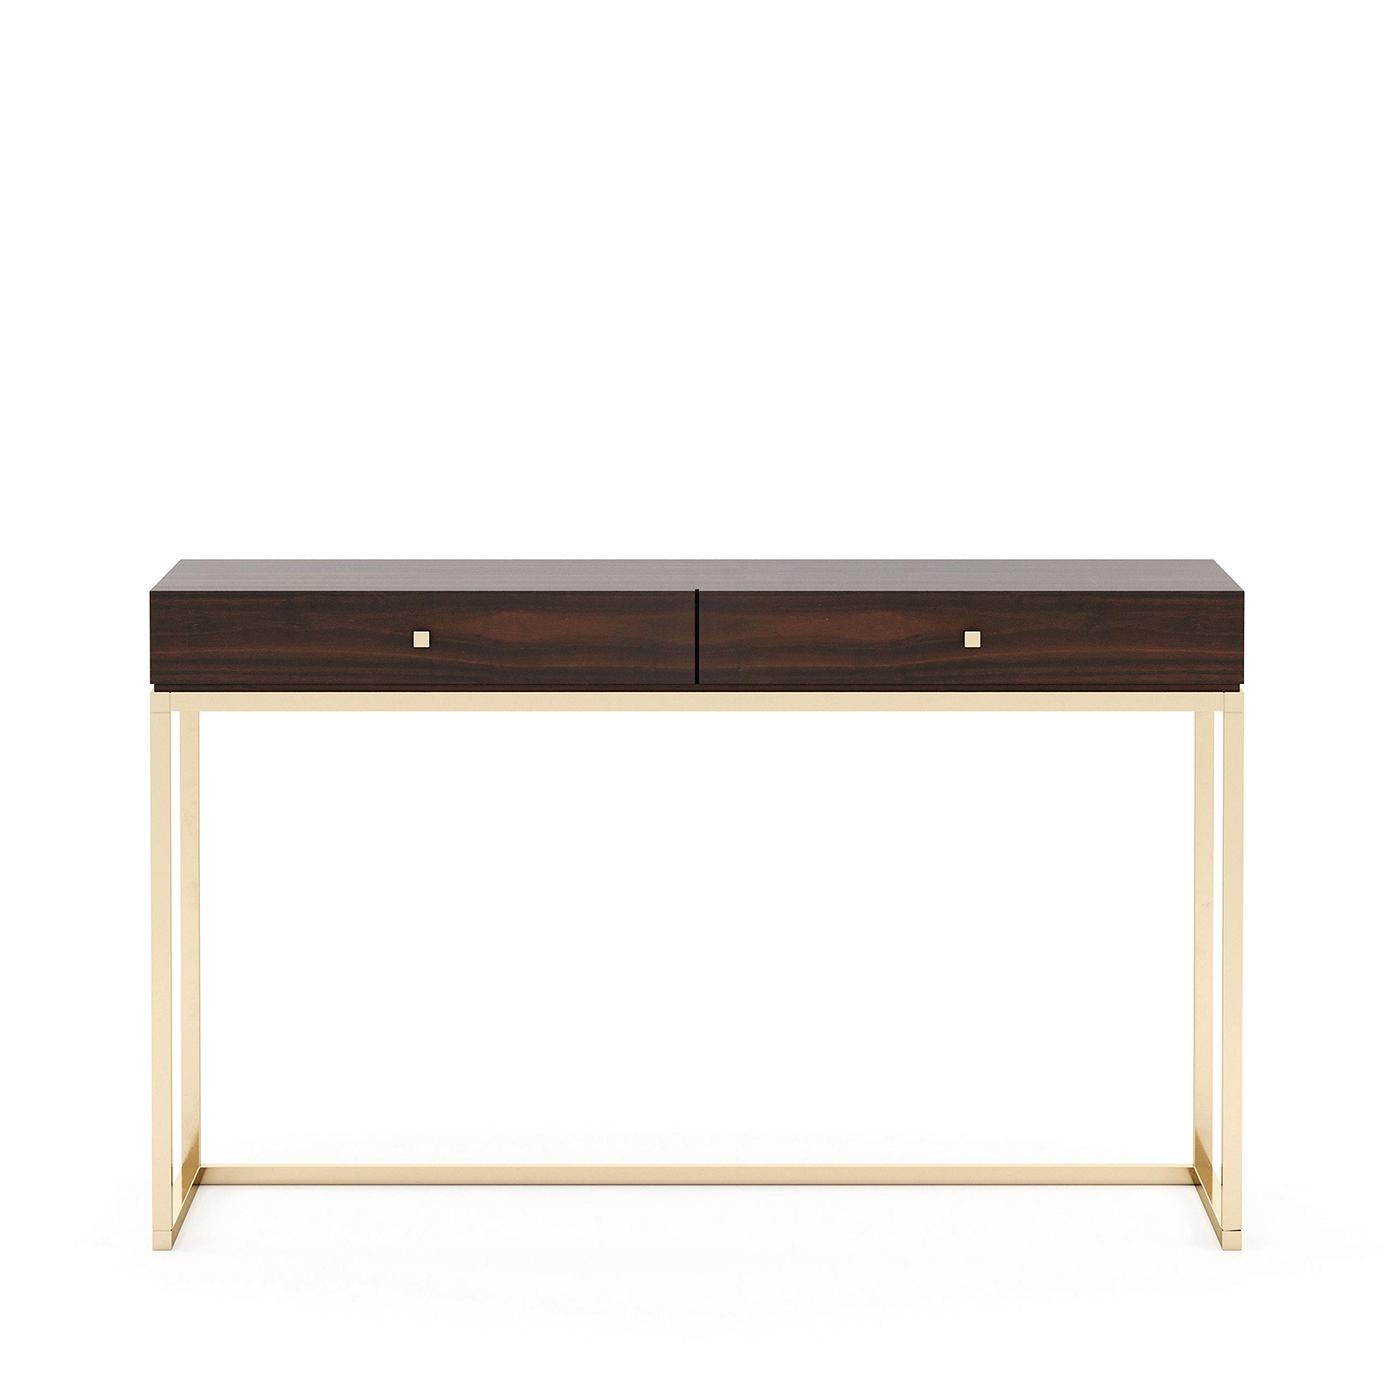 Desk Tanka with structure in smocked eucalyptus wood in 
matte finish, with 2 drawers with easy glide system. With base
in polished stainless steel in gold finish.
Also available in ebony matte finish, or grey oak matte finish,
or natural oak